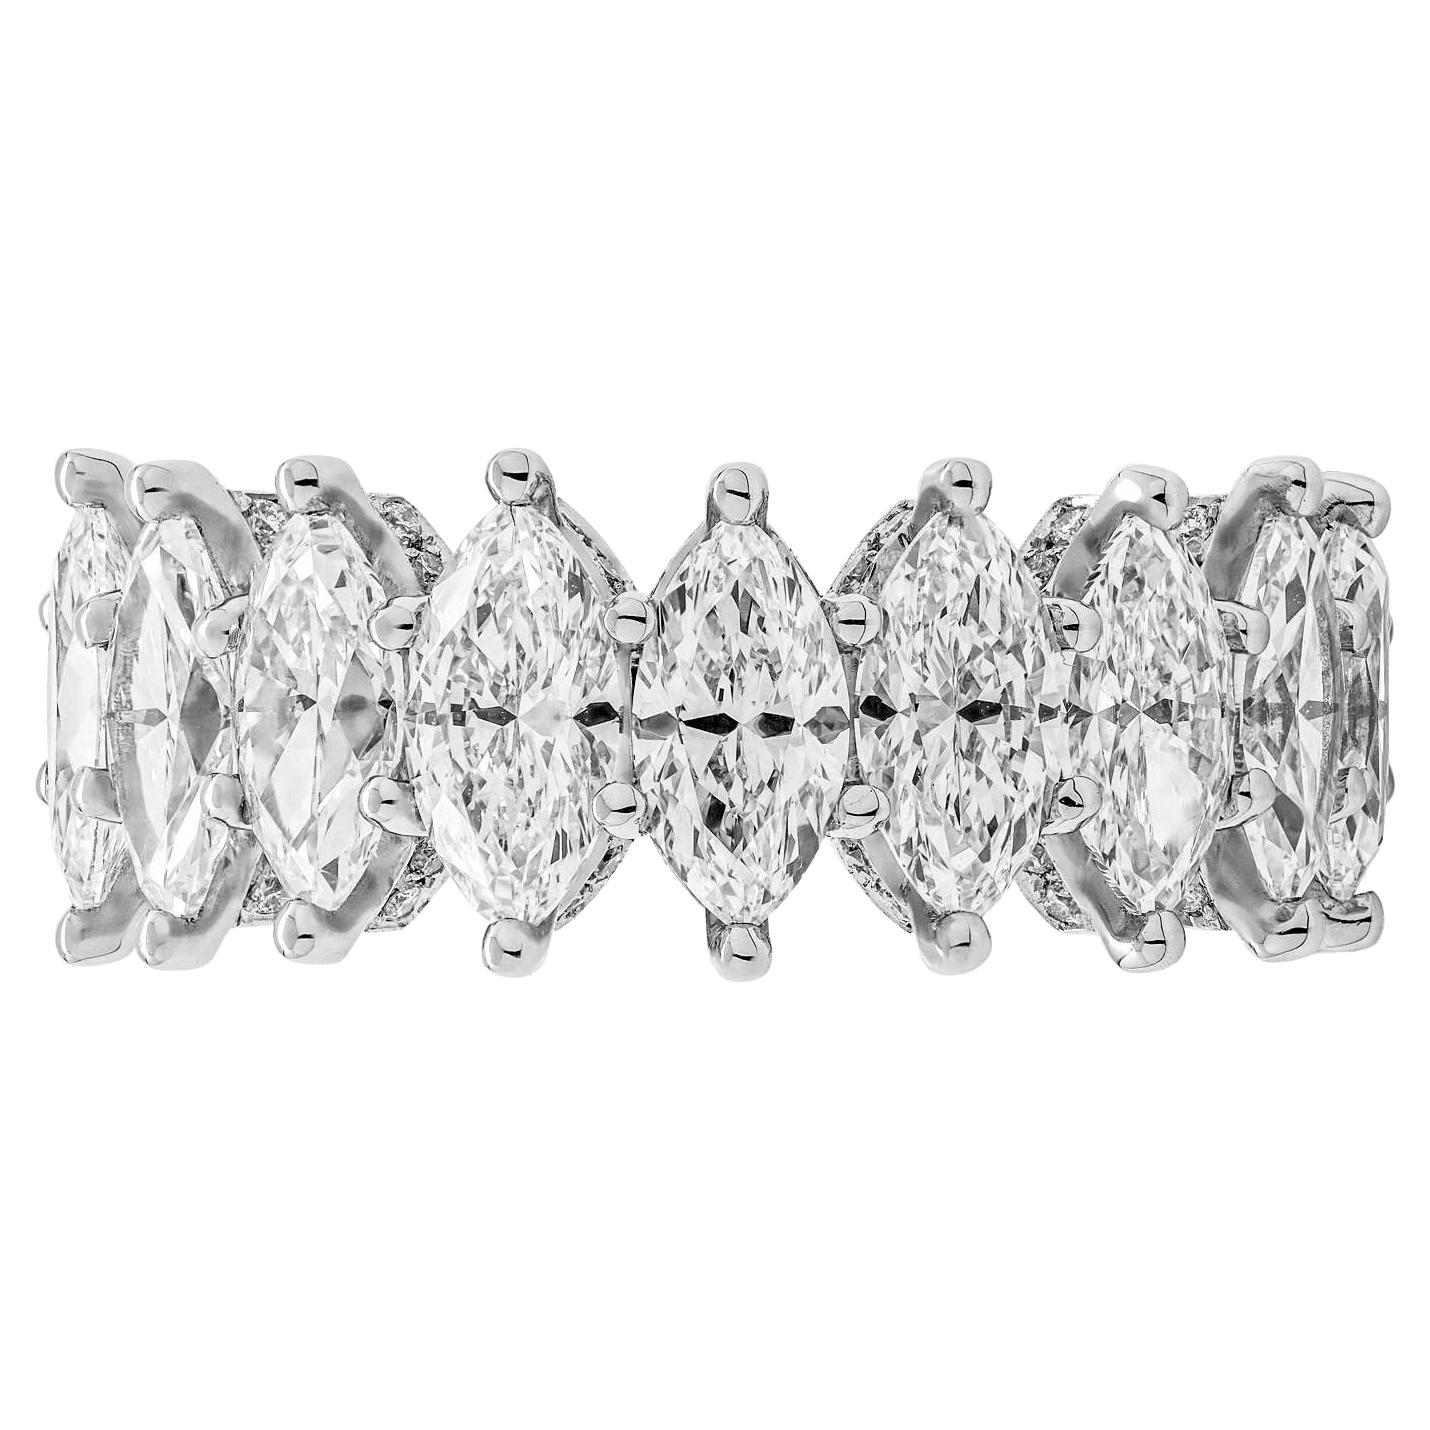 Eternity band with 6.88 Carat Marquise Cut Diamonds Mounted in Platinum 950, 18 Marquise cut diamonds won't miss a sparkle! Beautiful cut, bold and classy Each stone is 0.40ct - delivers a large high end look! Mounting features halo with natural